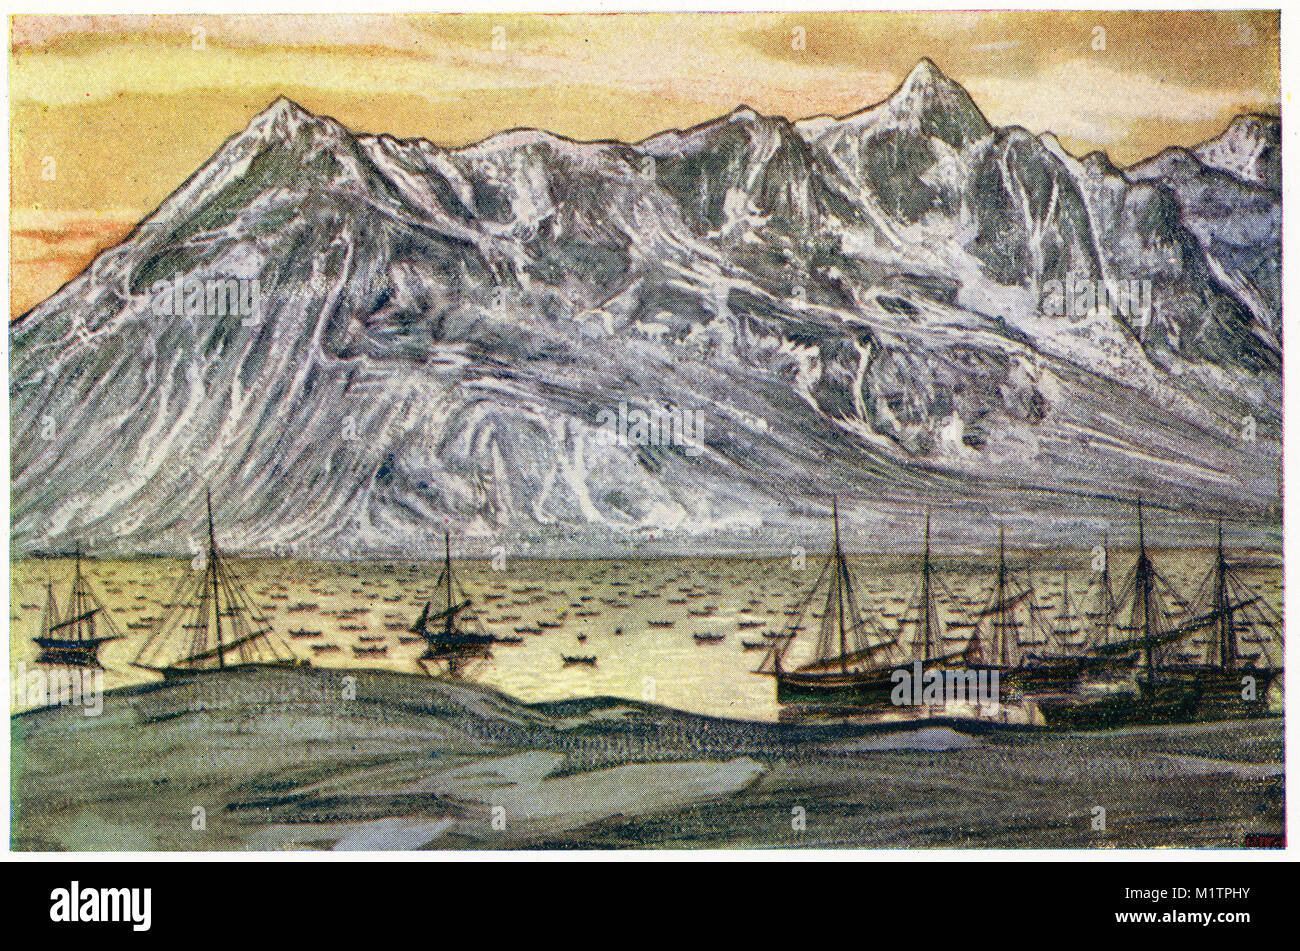 Halftone illustration of the Arctic Coast and a fleet of fishing boats. Home of the eskimos, circa 1900. From an original image in How Other People Live by H. Clive Barnard, 1918. Stock Photo